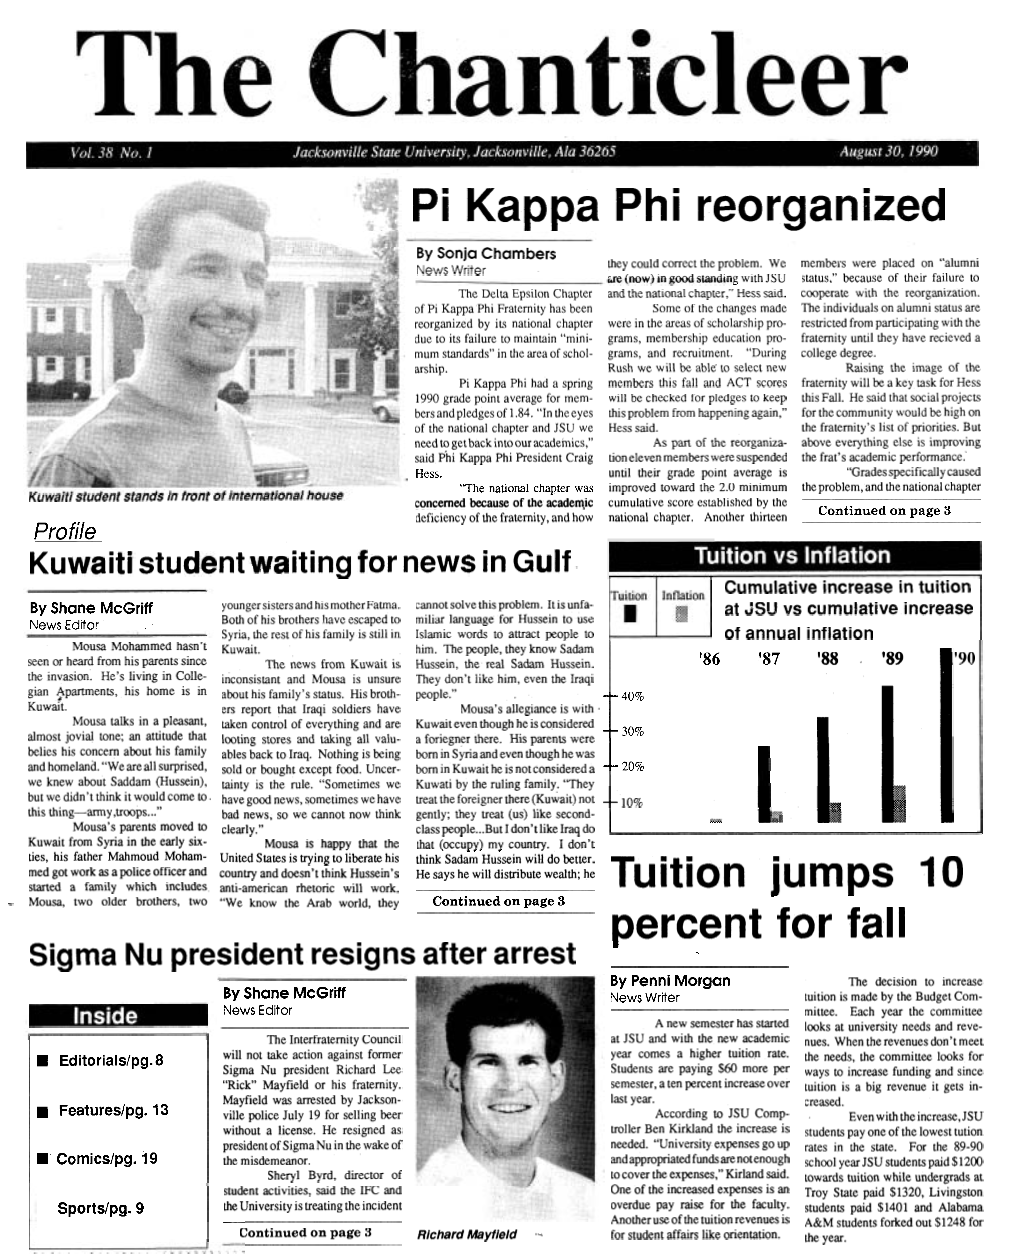 Pi Kappa Phi Reorganized by Sonja Chambers They Could Correct the Problem